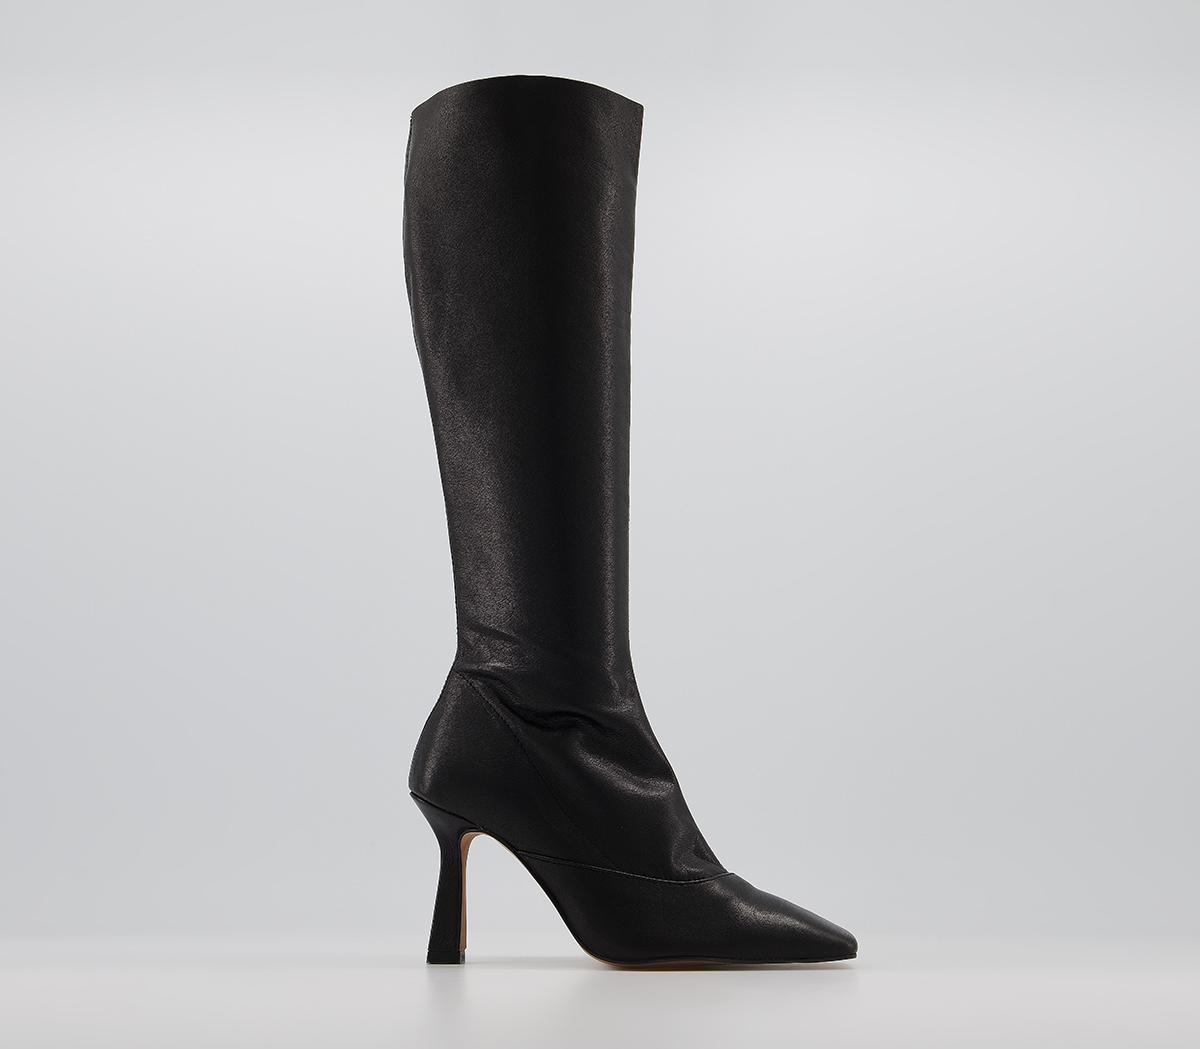 OFFICE Kimber Square Toe Knee Boots Black Leather - Knee High Boots